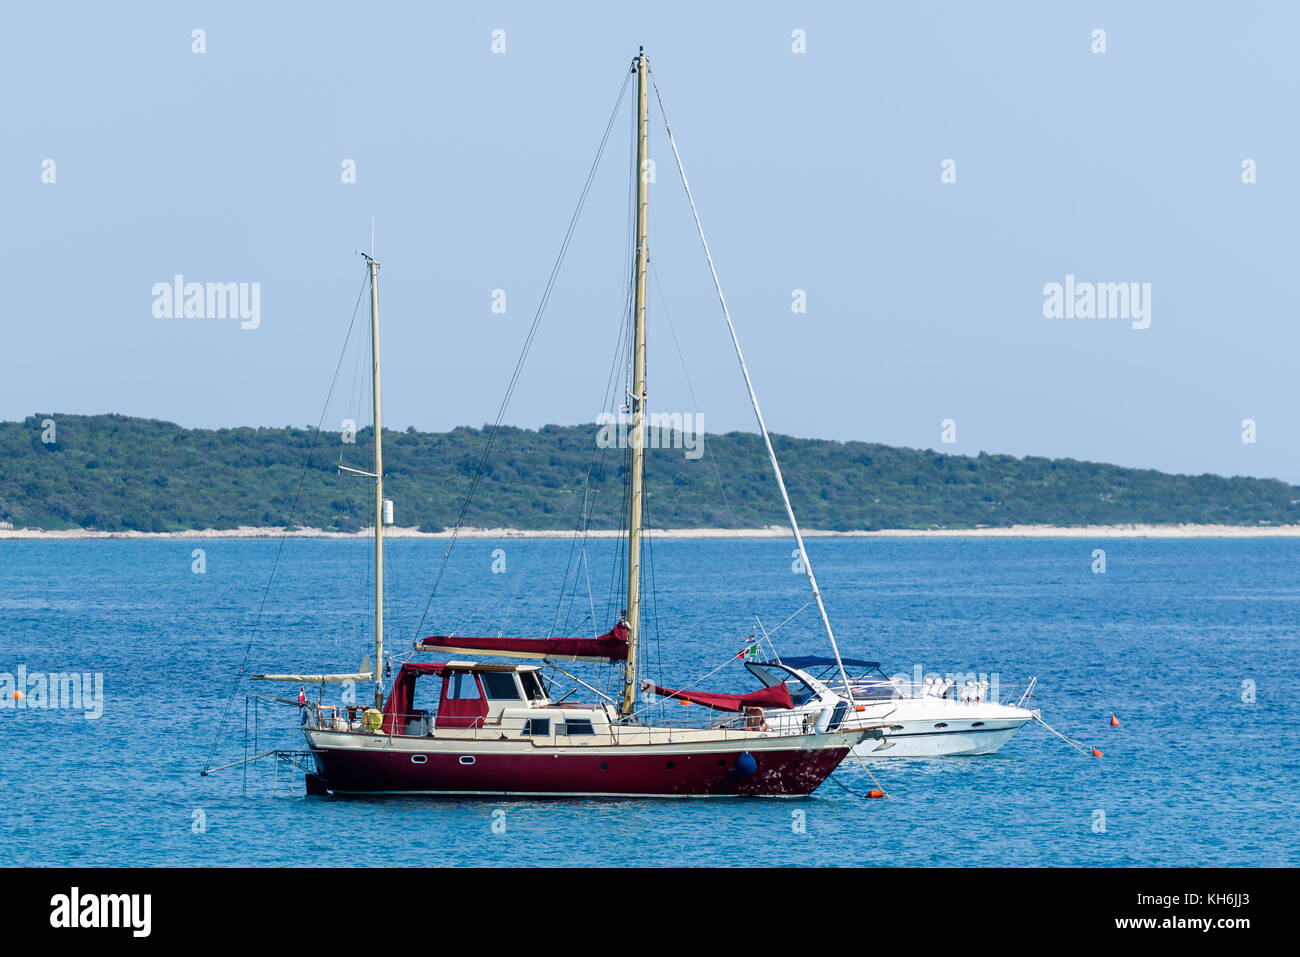 Old wooden sailboat ship is moored in calm sea. Vintage sail ship with two masts in Adriatic sea Croatia. Stock Photo